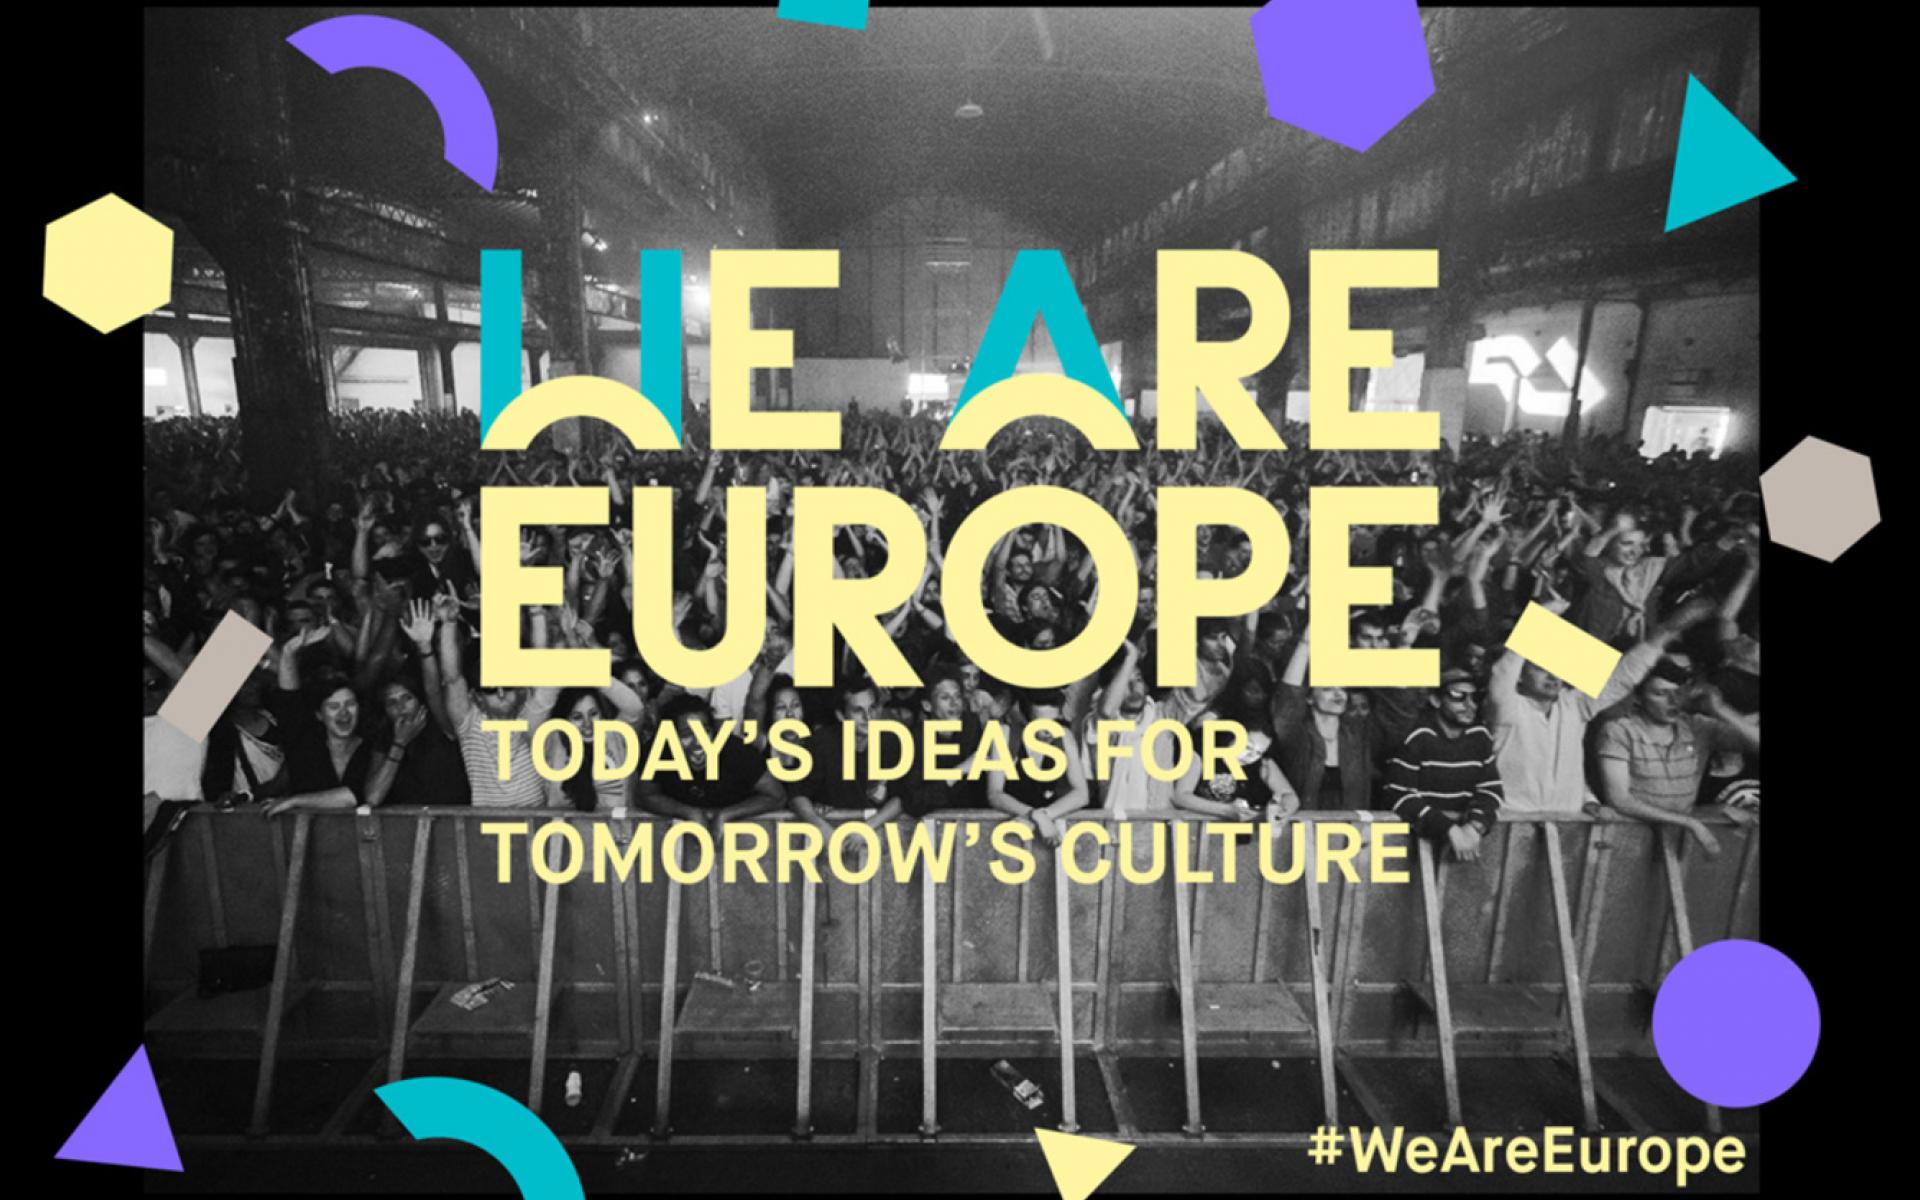 We are europe